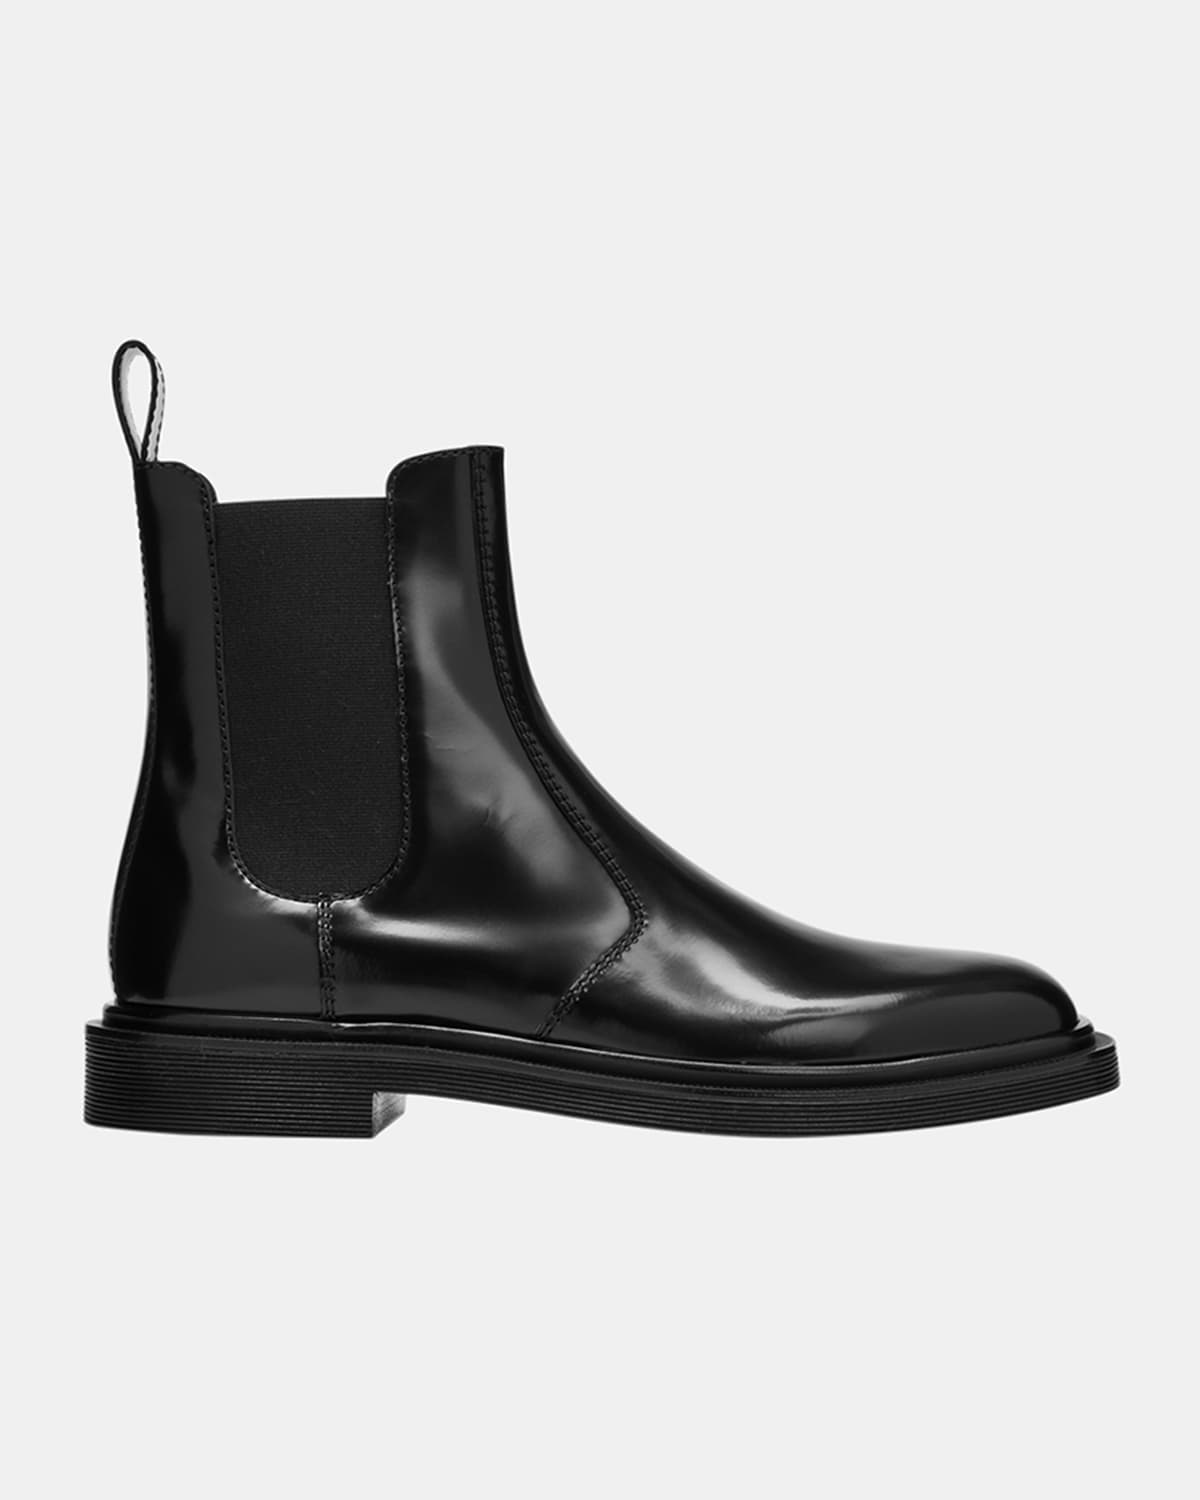 Ranger Patent Leather Chelsea Boots